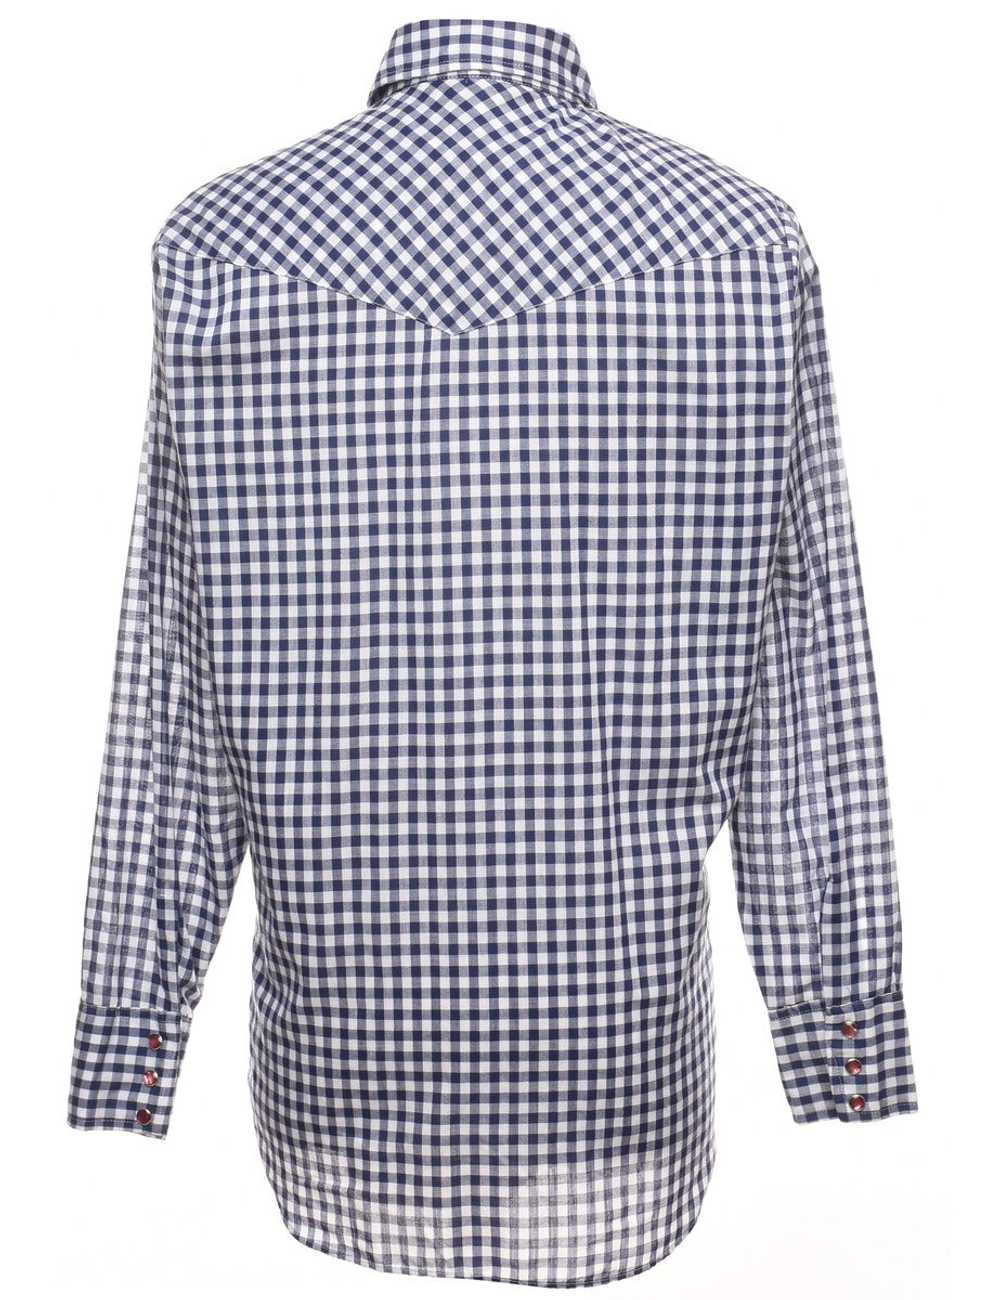 Navy Checked Classic Western Shirt - M - image 2